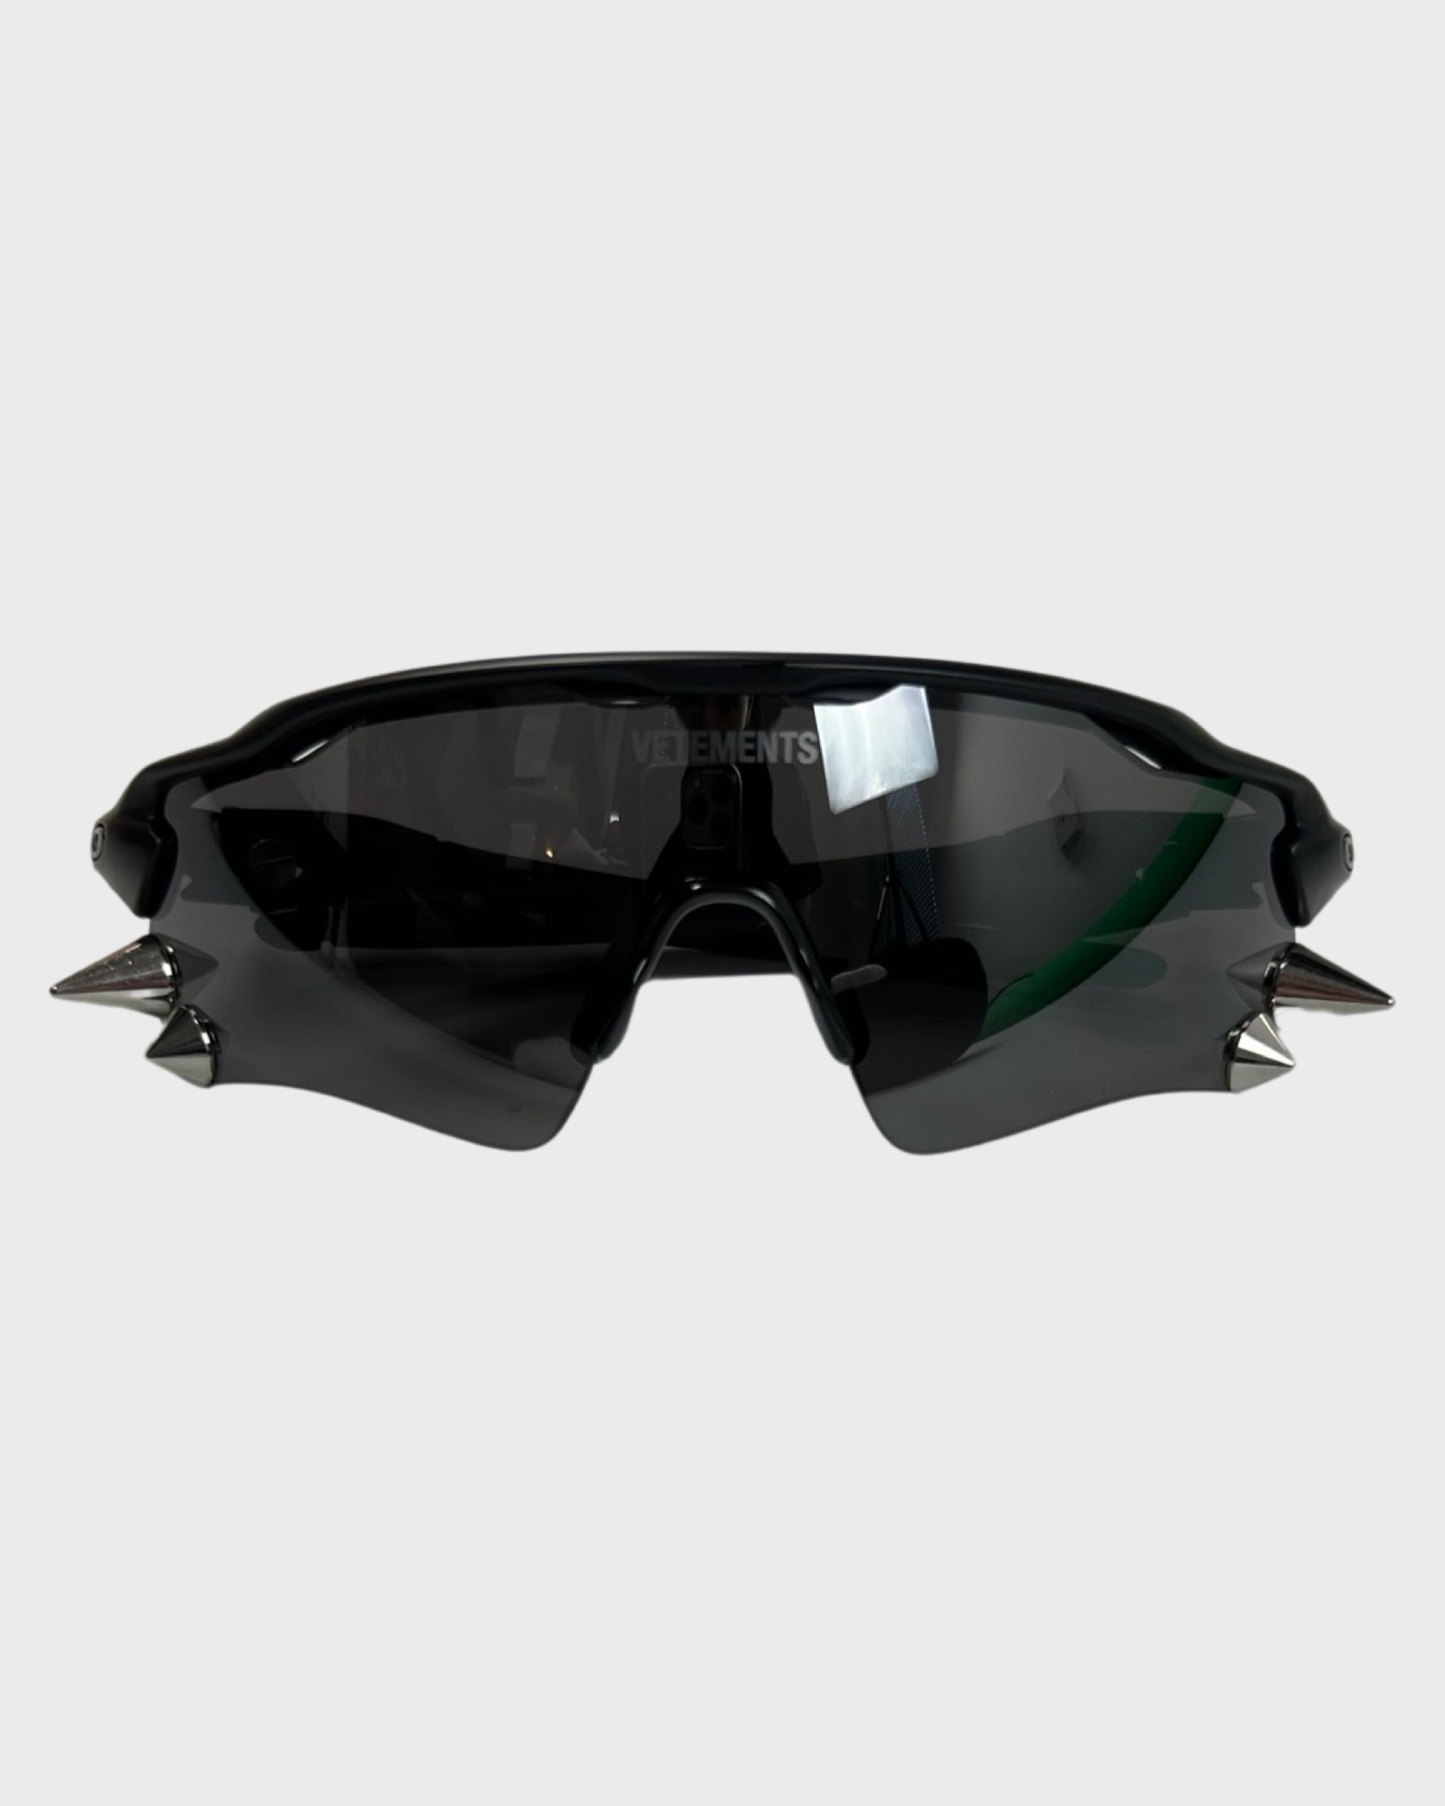 Vetements x Oakley 200 spiked Sunglasses shades in black SZ:OS